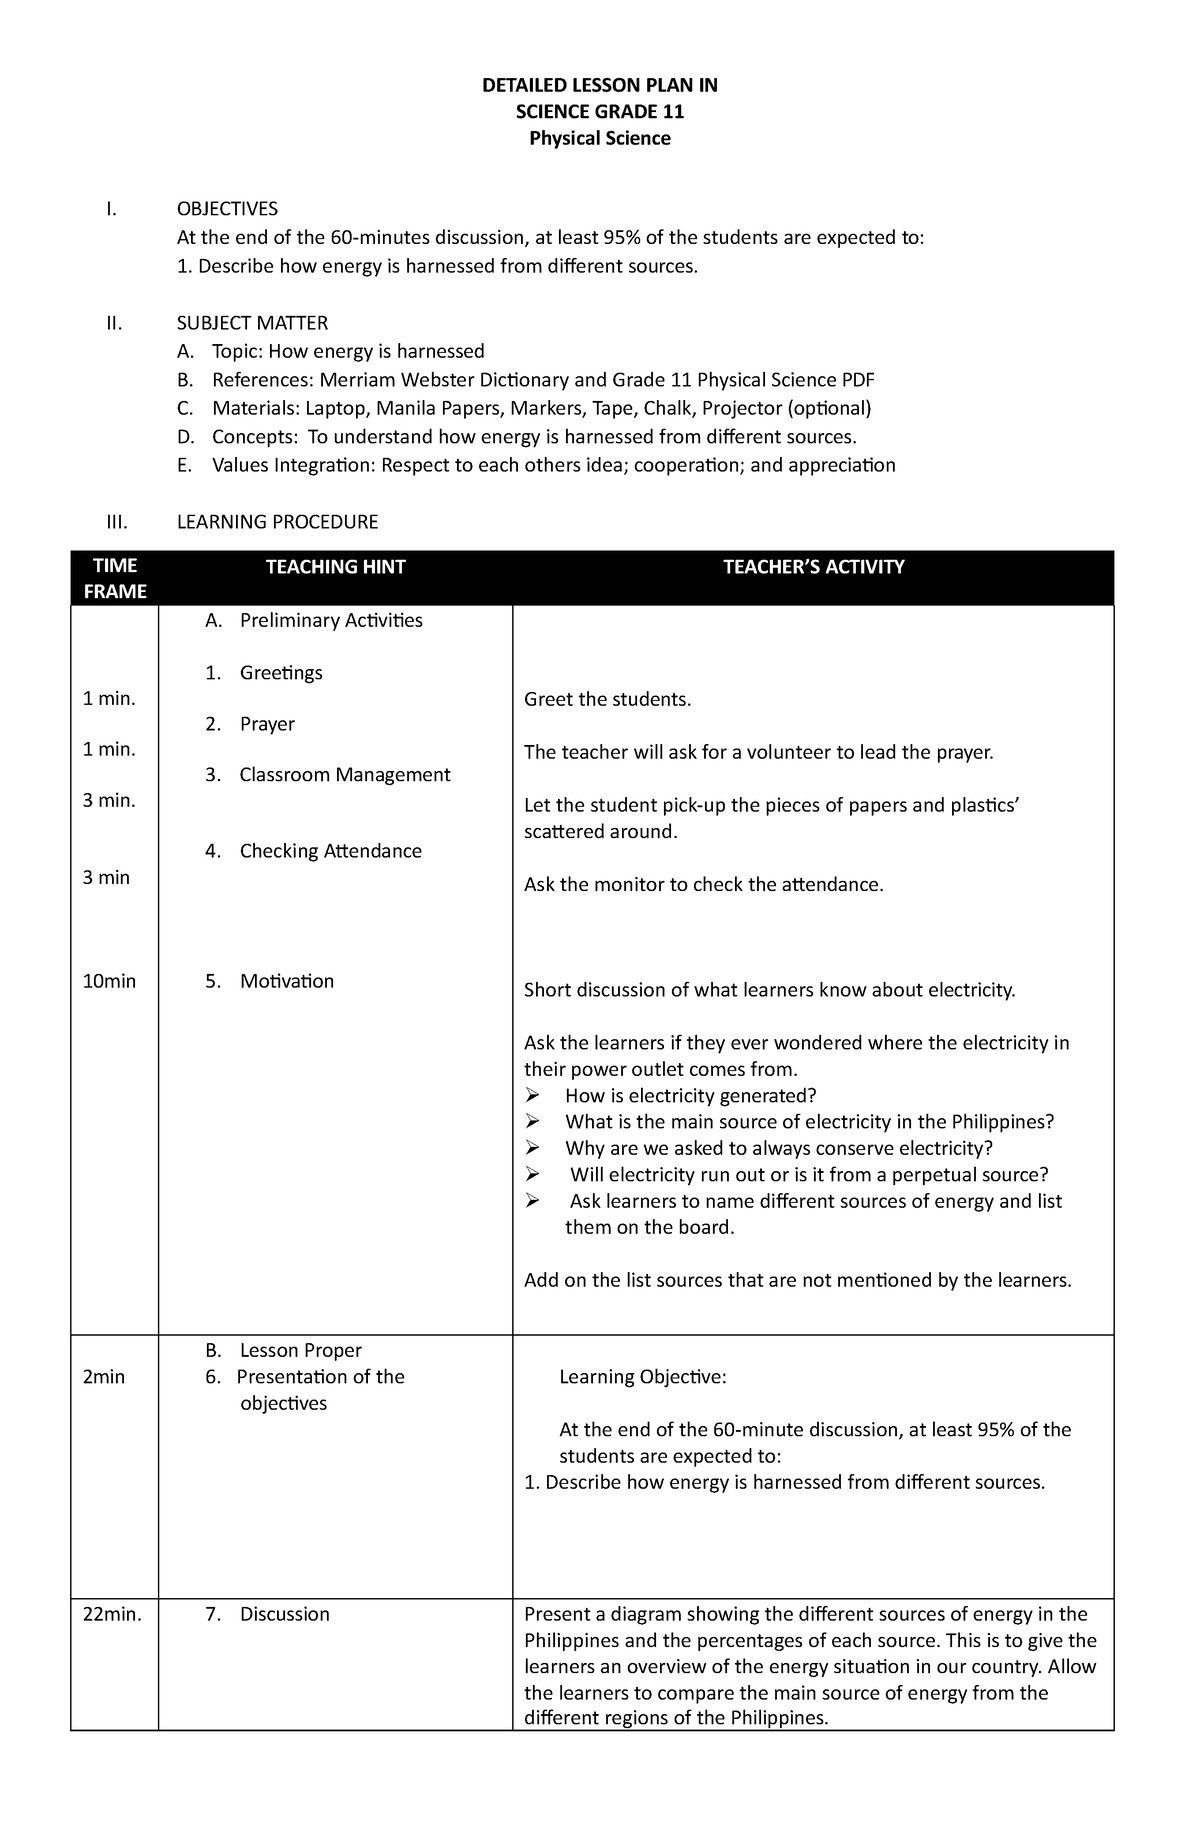 Dlp In Physical Science Grade 11 Detailed Lesson Plan In Science Grade 11 Physical Science I 7882